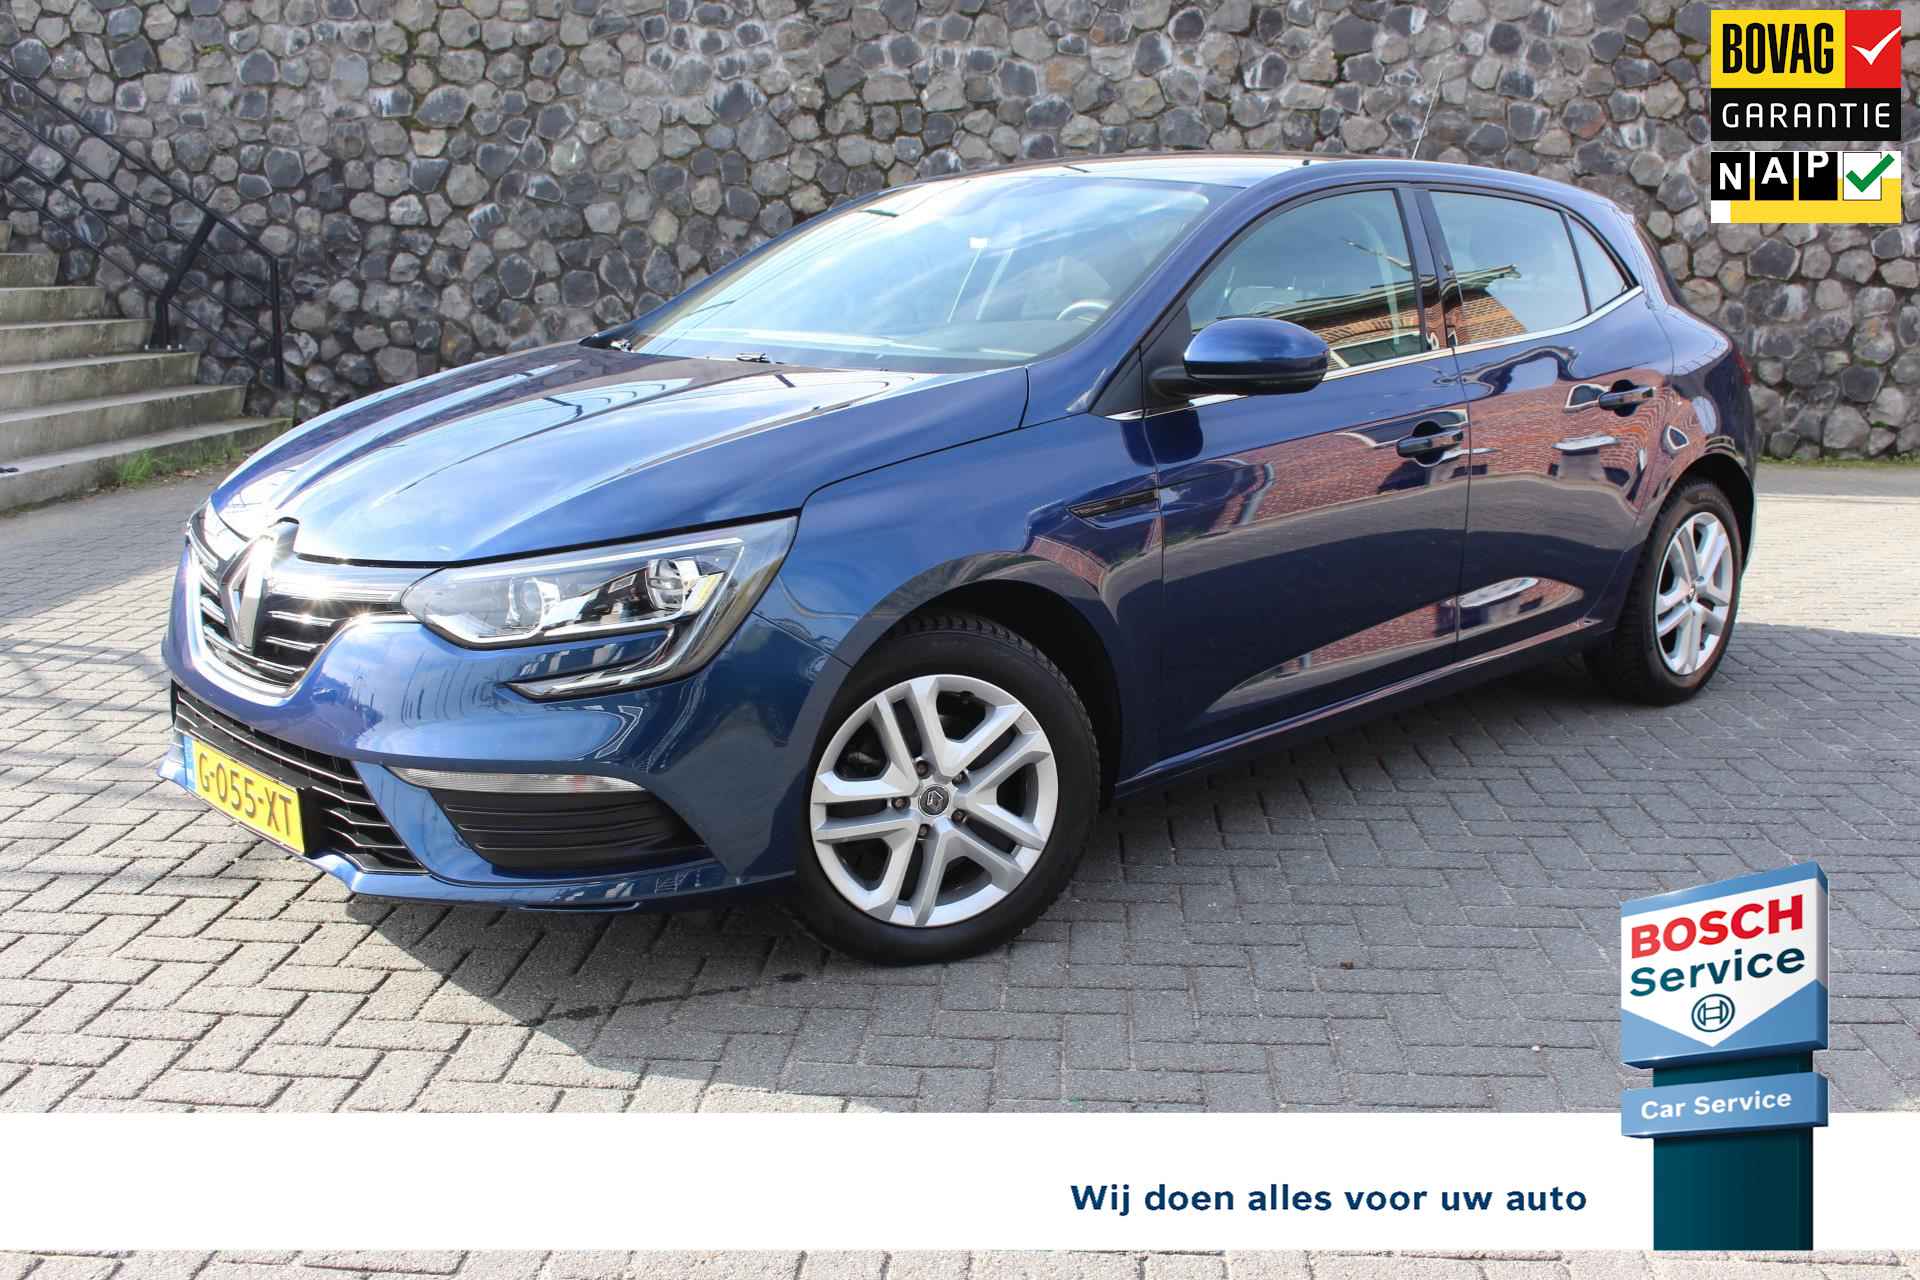 Renault Mégane 1.3 TCe Zen Dab+ audio Climate + cruise control Navi PDC achter Led verlichting voor + achter - 1/34